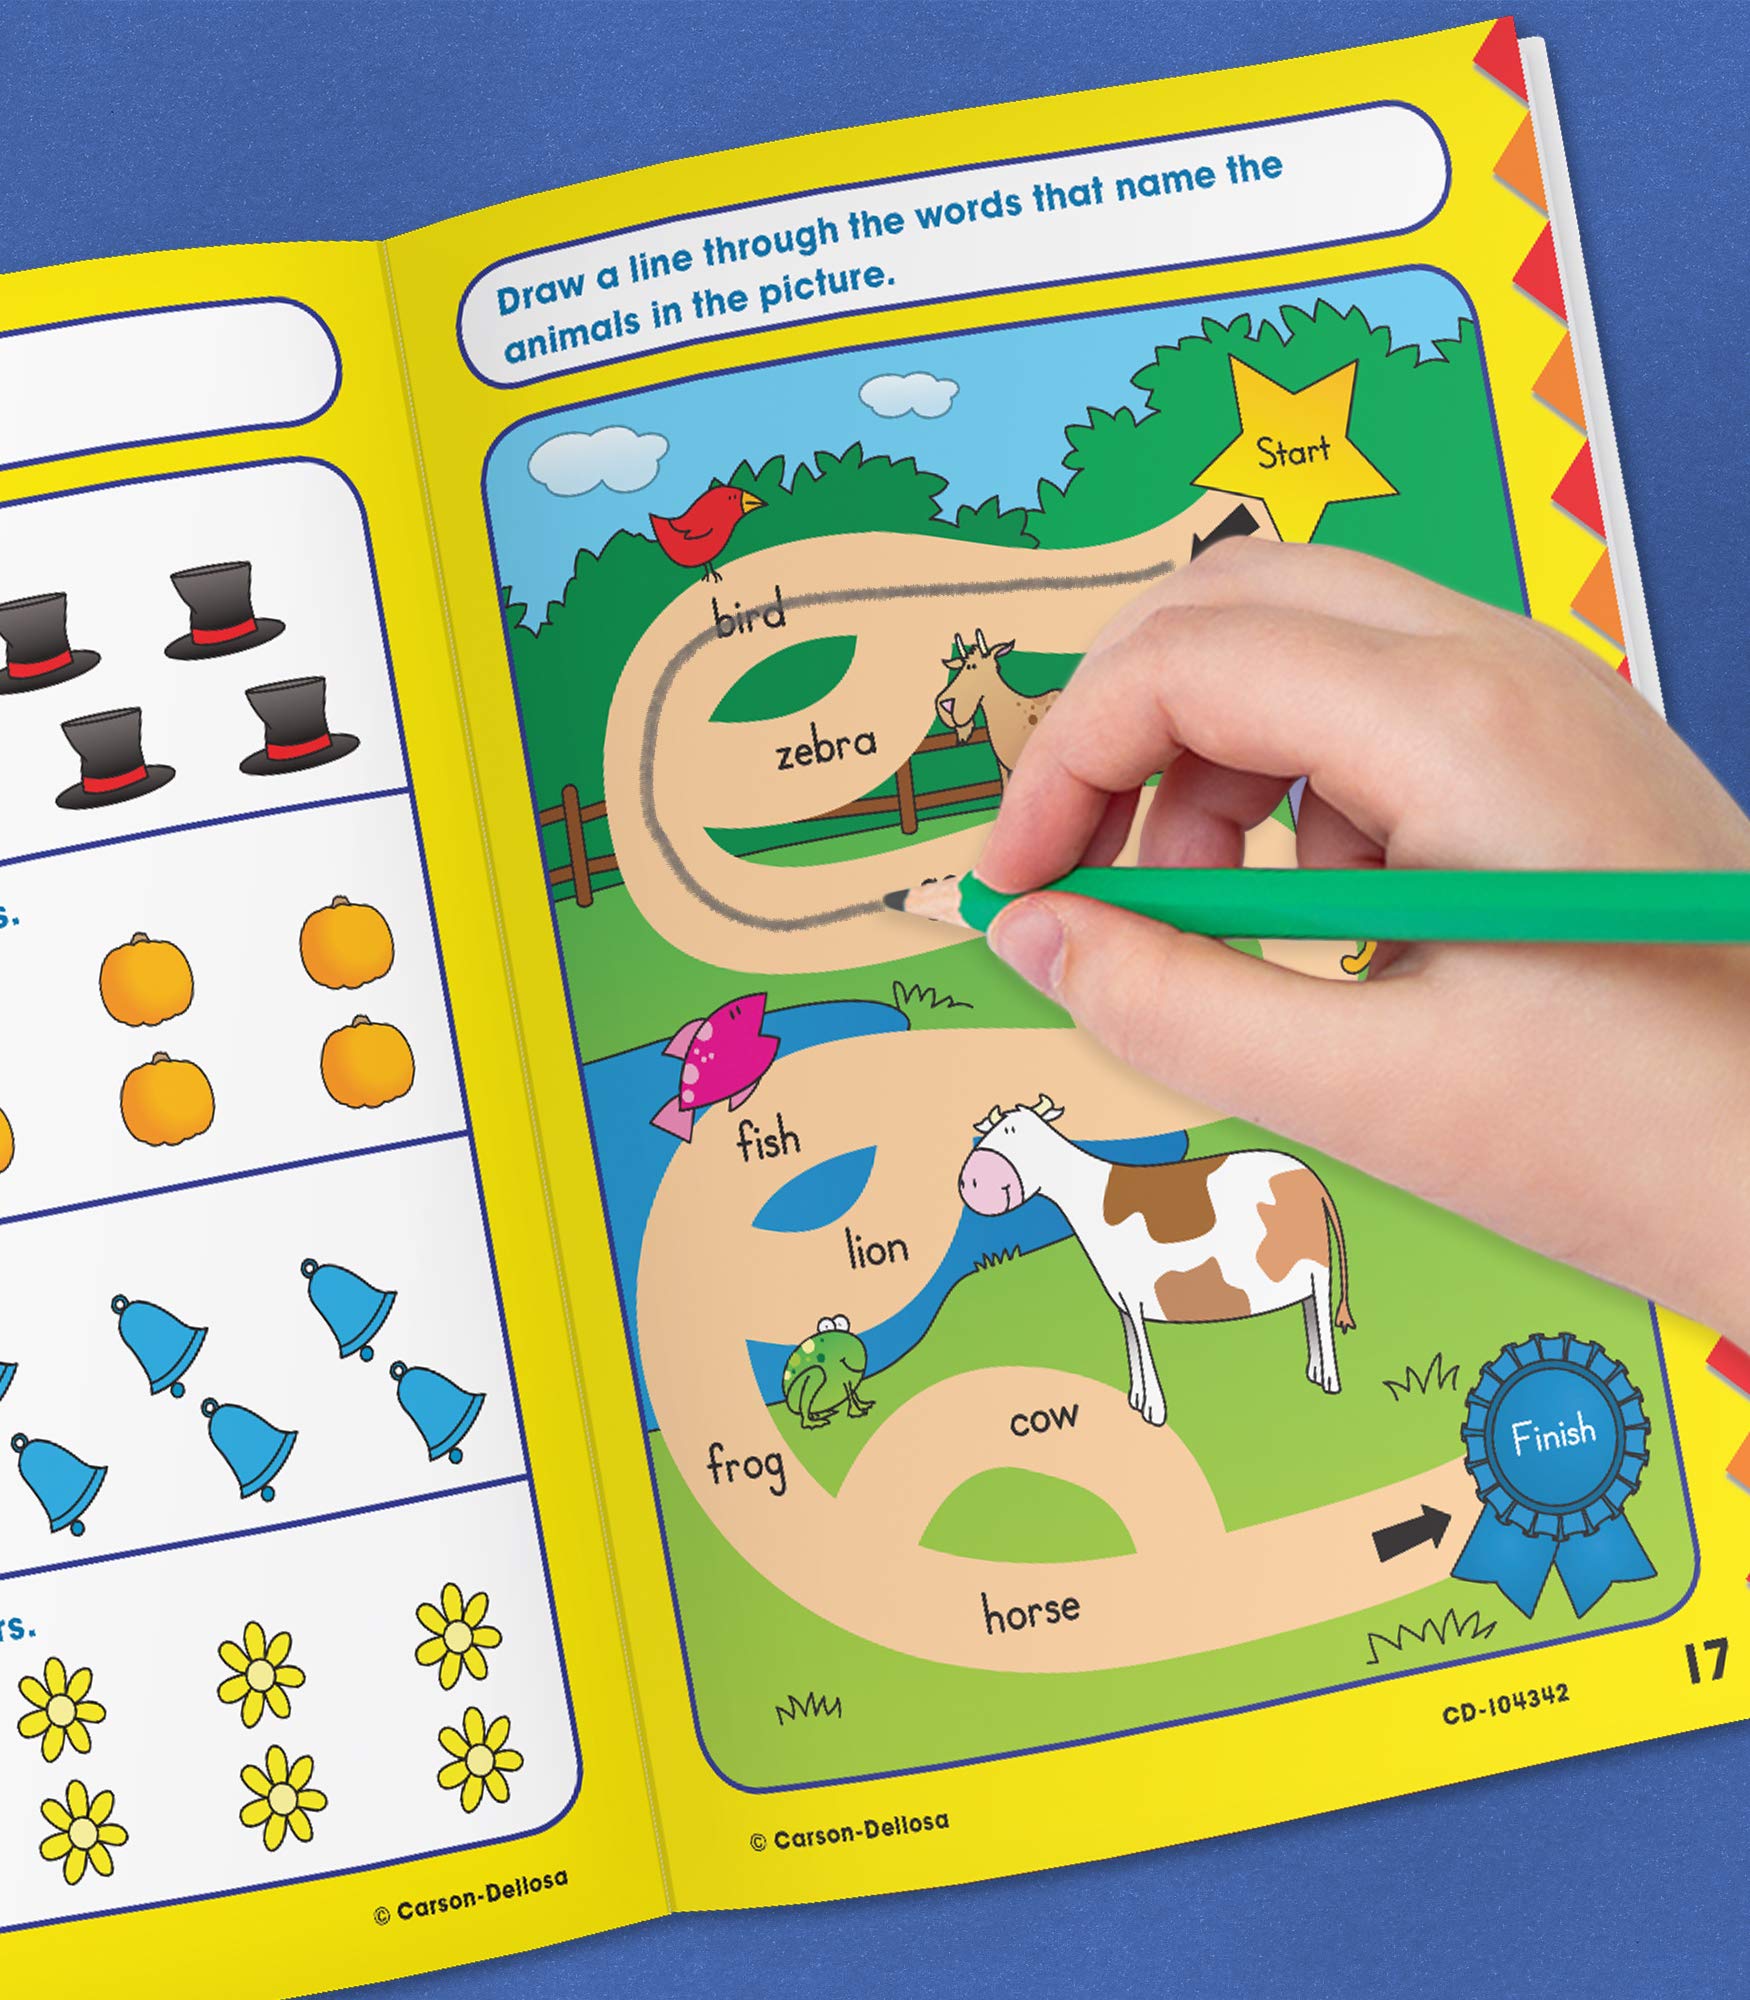 Carson Dellosa Beginning Reading Workbook―Kindergarten Early Reader Phonics Practice With Stickers, Incentive Chart, Puzzles, Coloring Activities (64 pgs) (Volume 3) (Home Workbooks)